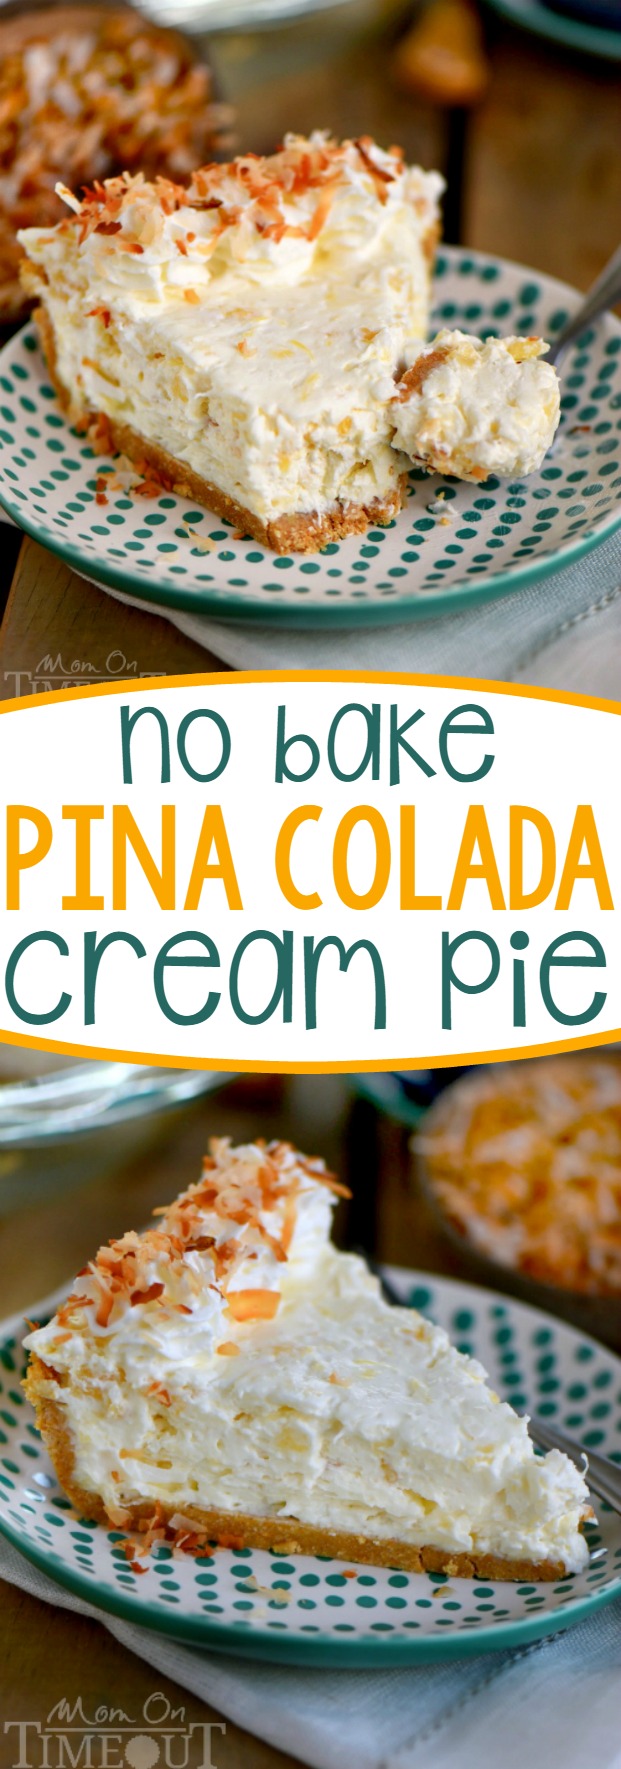 If you like drinking pina coladas...you're going to love this No Bake Pina Colada Cream Pie! It's absolutely the EASIEST pie and it tastes amazing! This pie goes great with friends :)